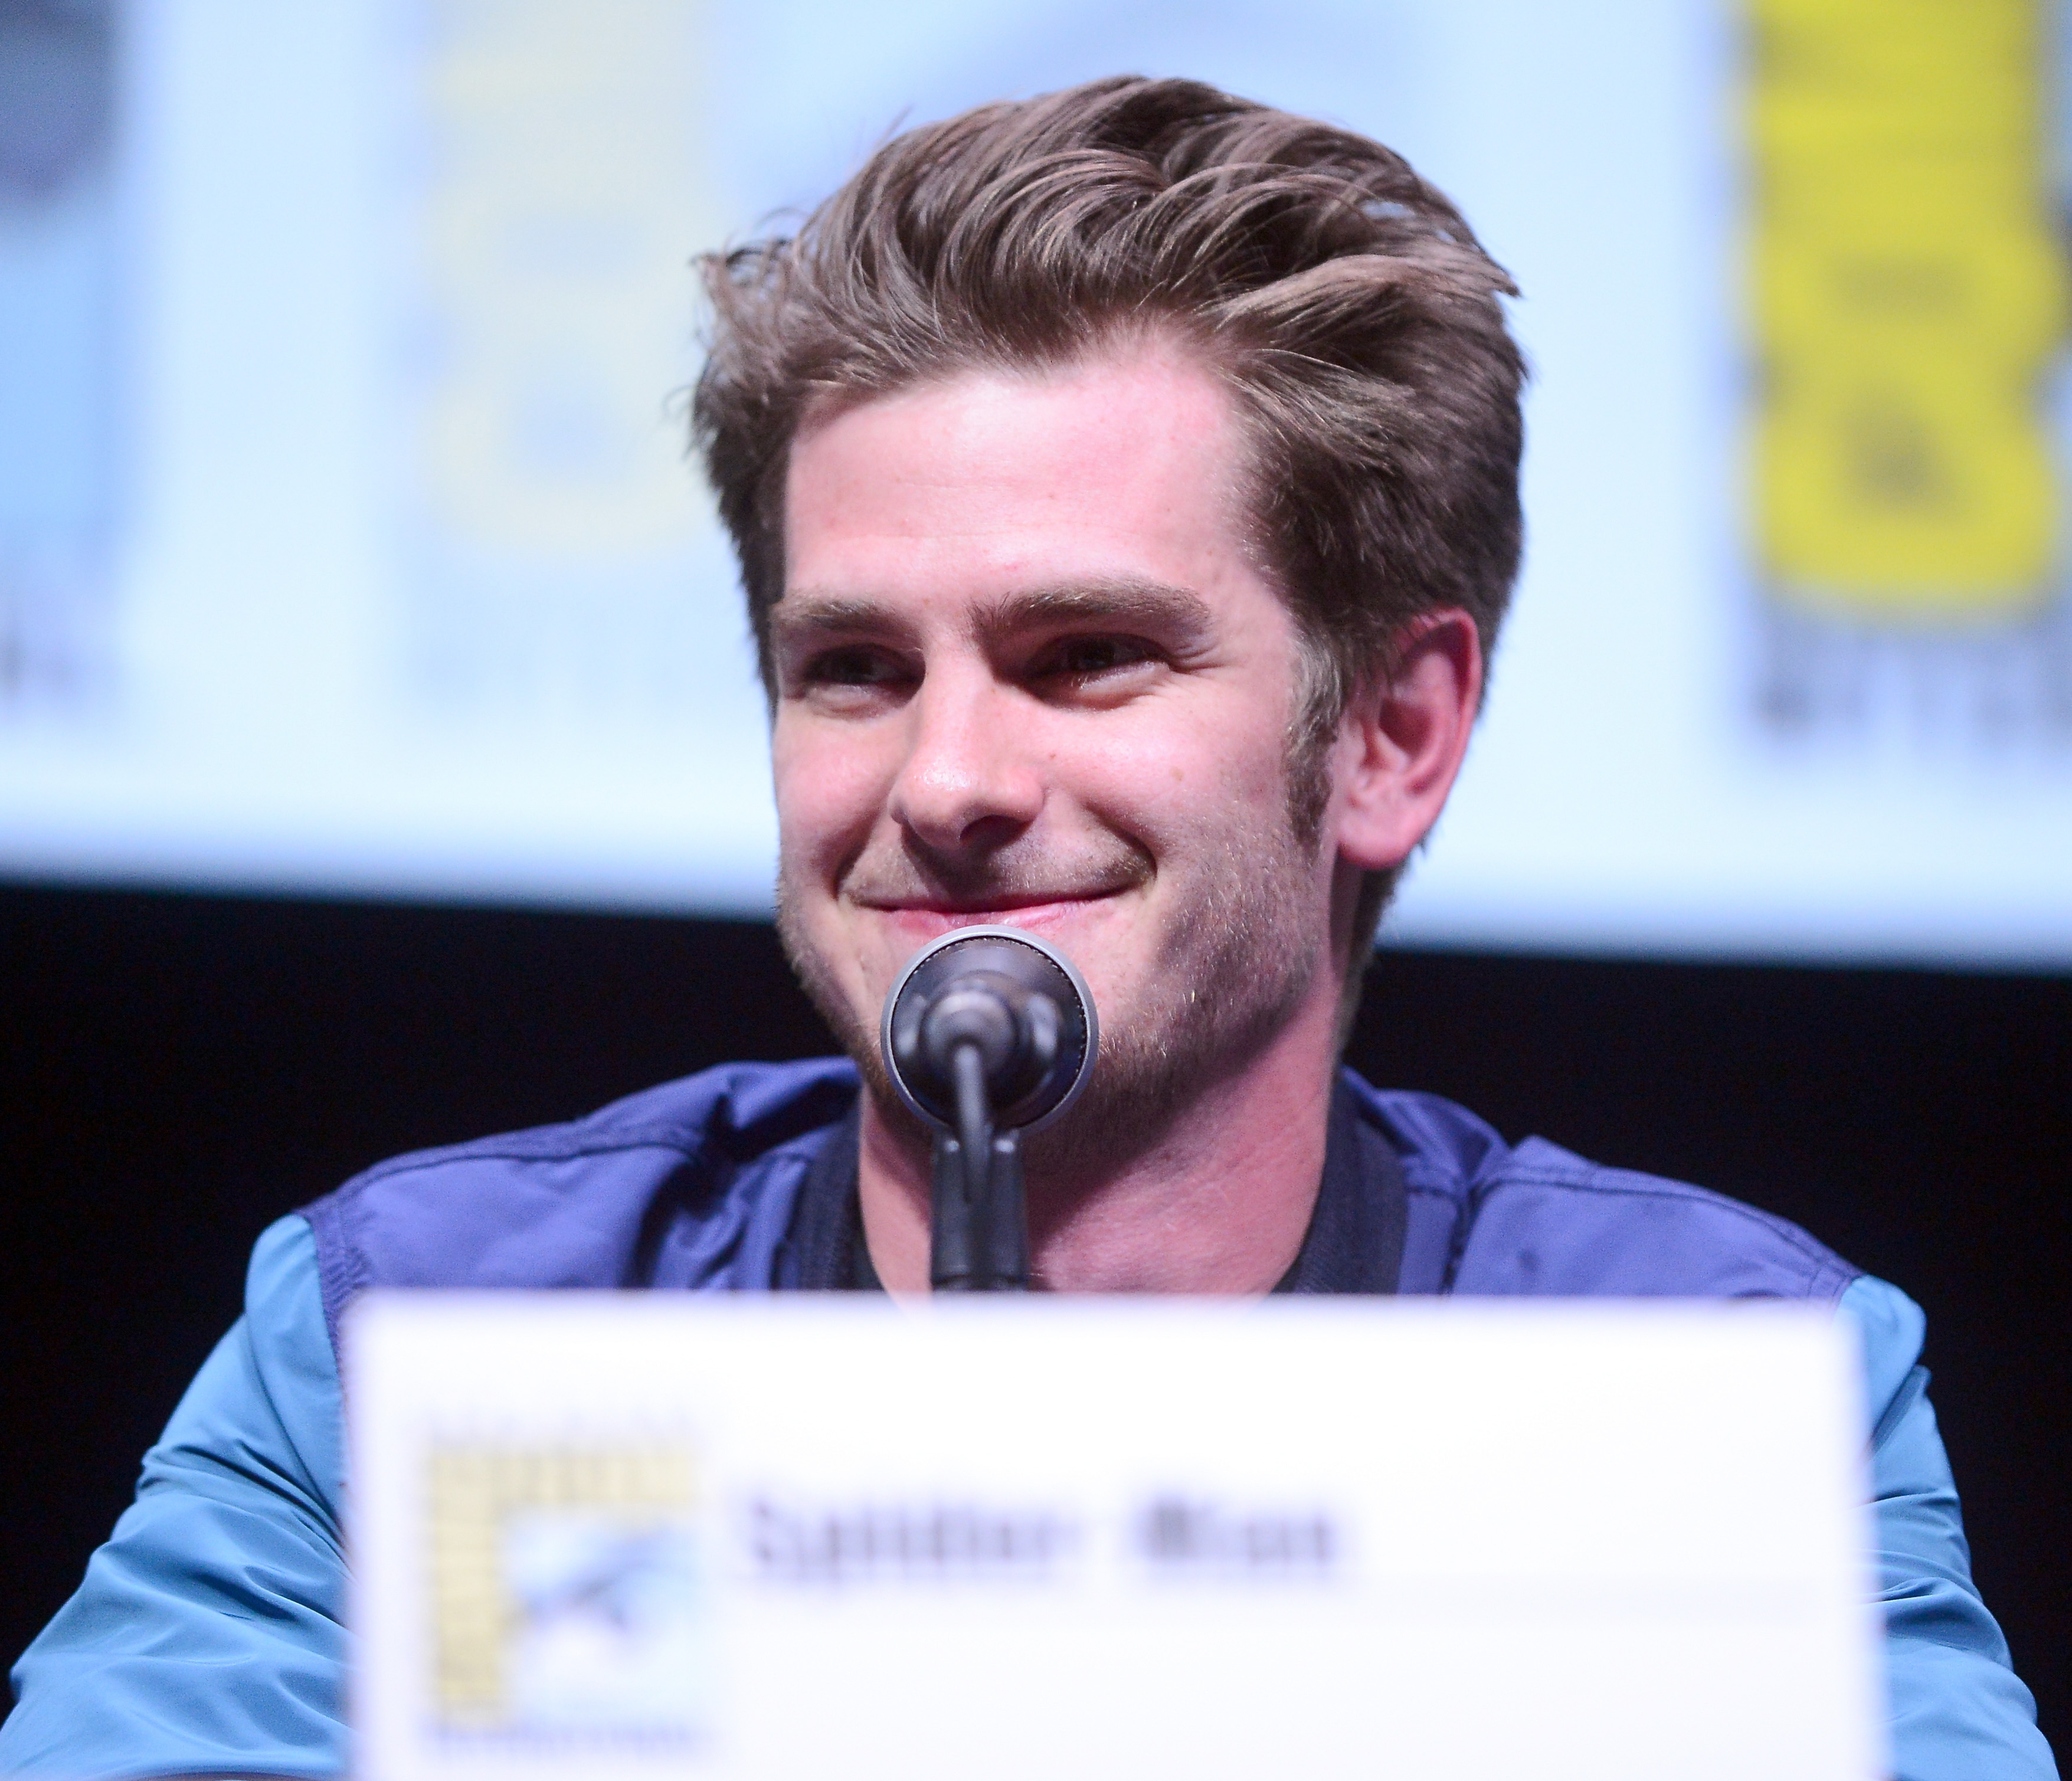 Andrew Garfield attends The Sony and Screen Gems Panelsl as part of Comic-Con International 2013 held at San Diego Convention Center on Friday July 19, 2012 in San Diego, California. (Albert L. Ortega&mdash;Getty Images)